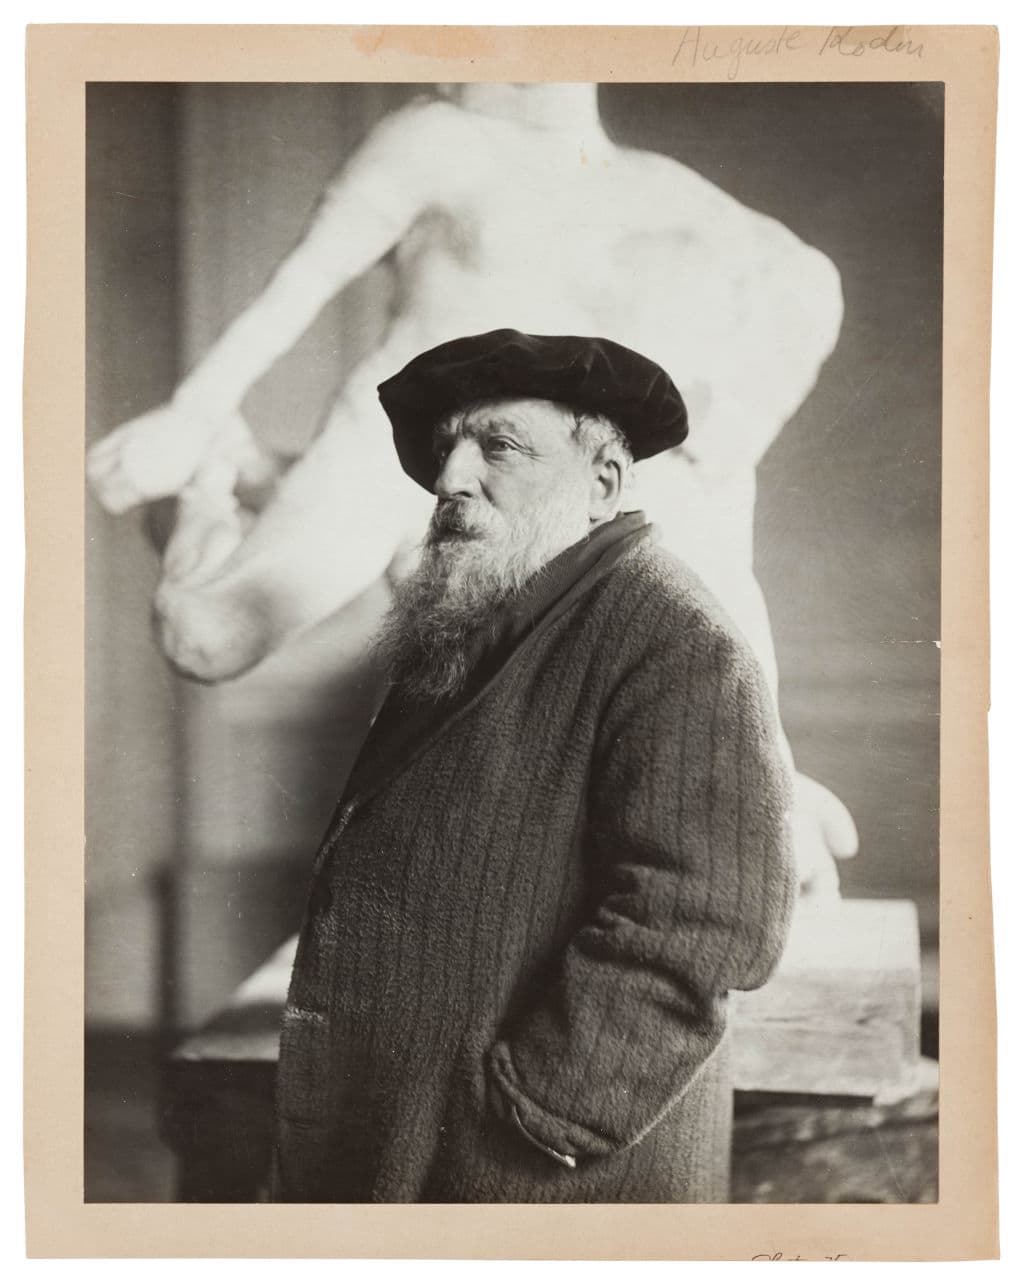 This image of Auguste Rodin was taken by an unknown photographer around 1915. (Courtesy Saint Honoré Art Consulting in Paris)